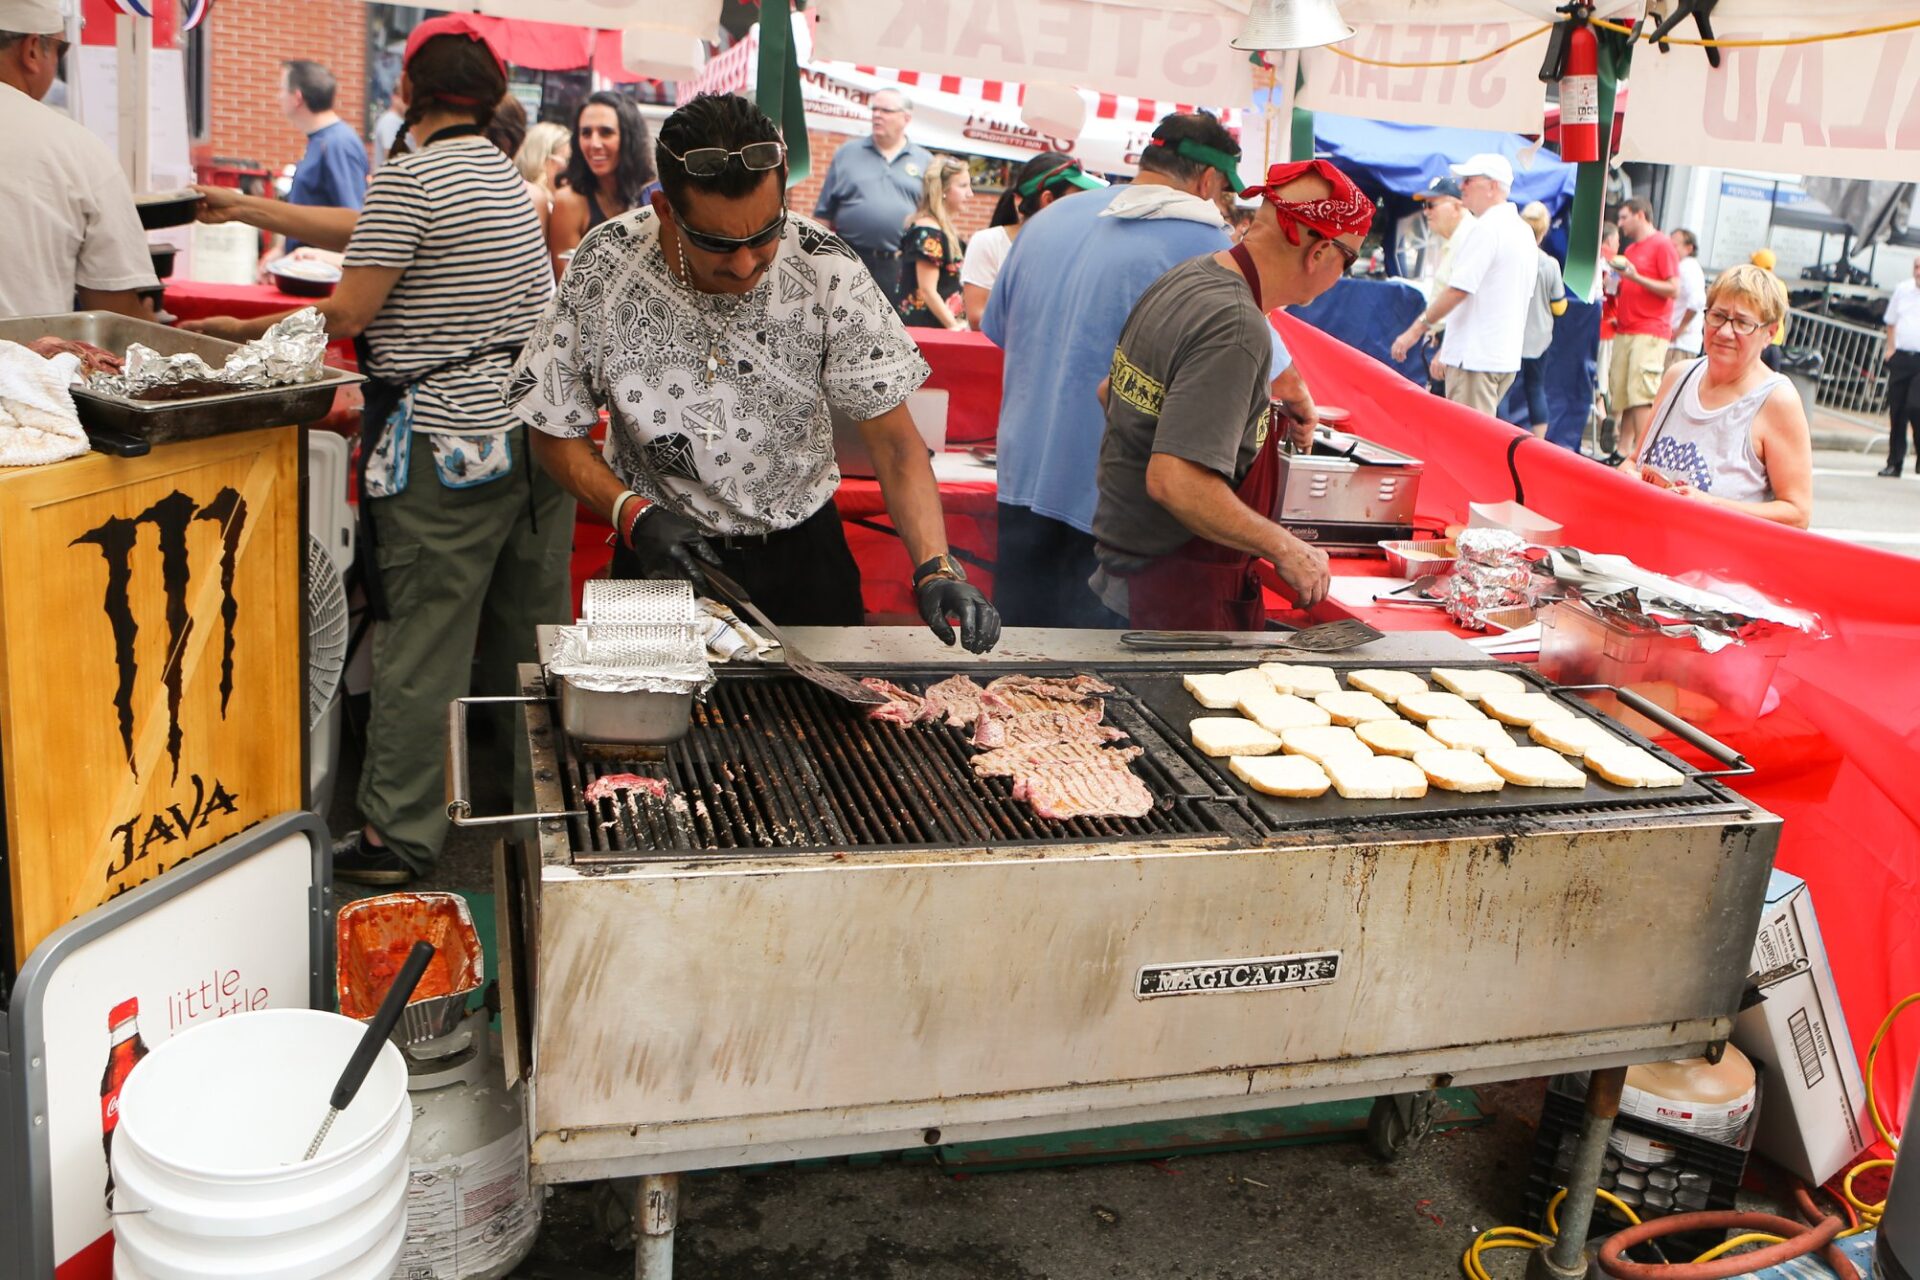 A man standing next to a grill cooking food.